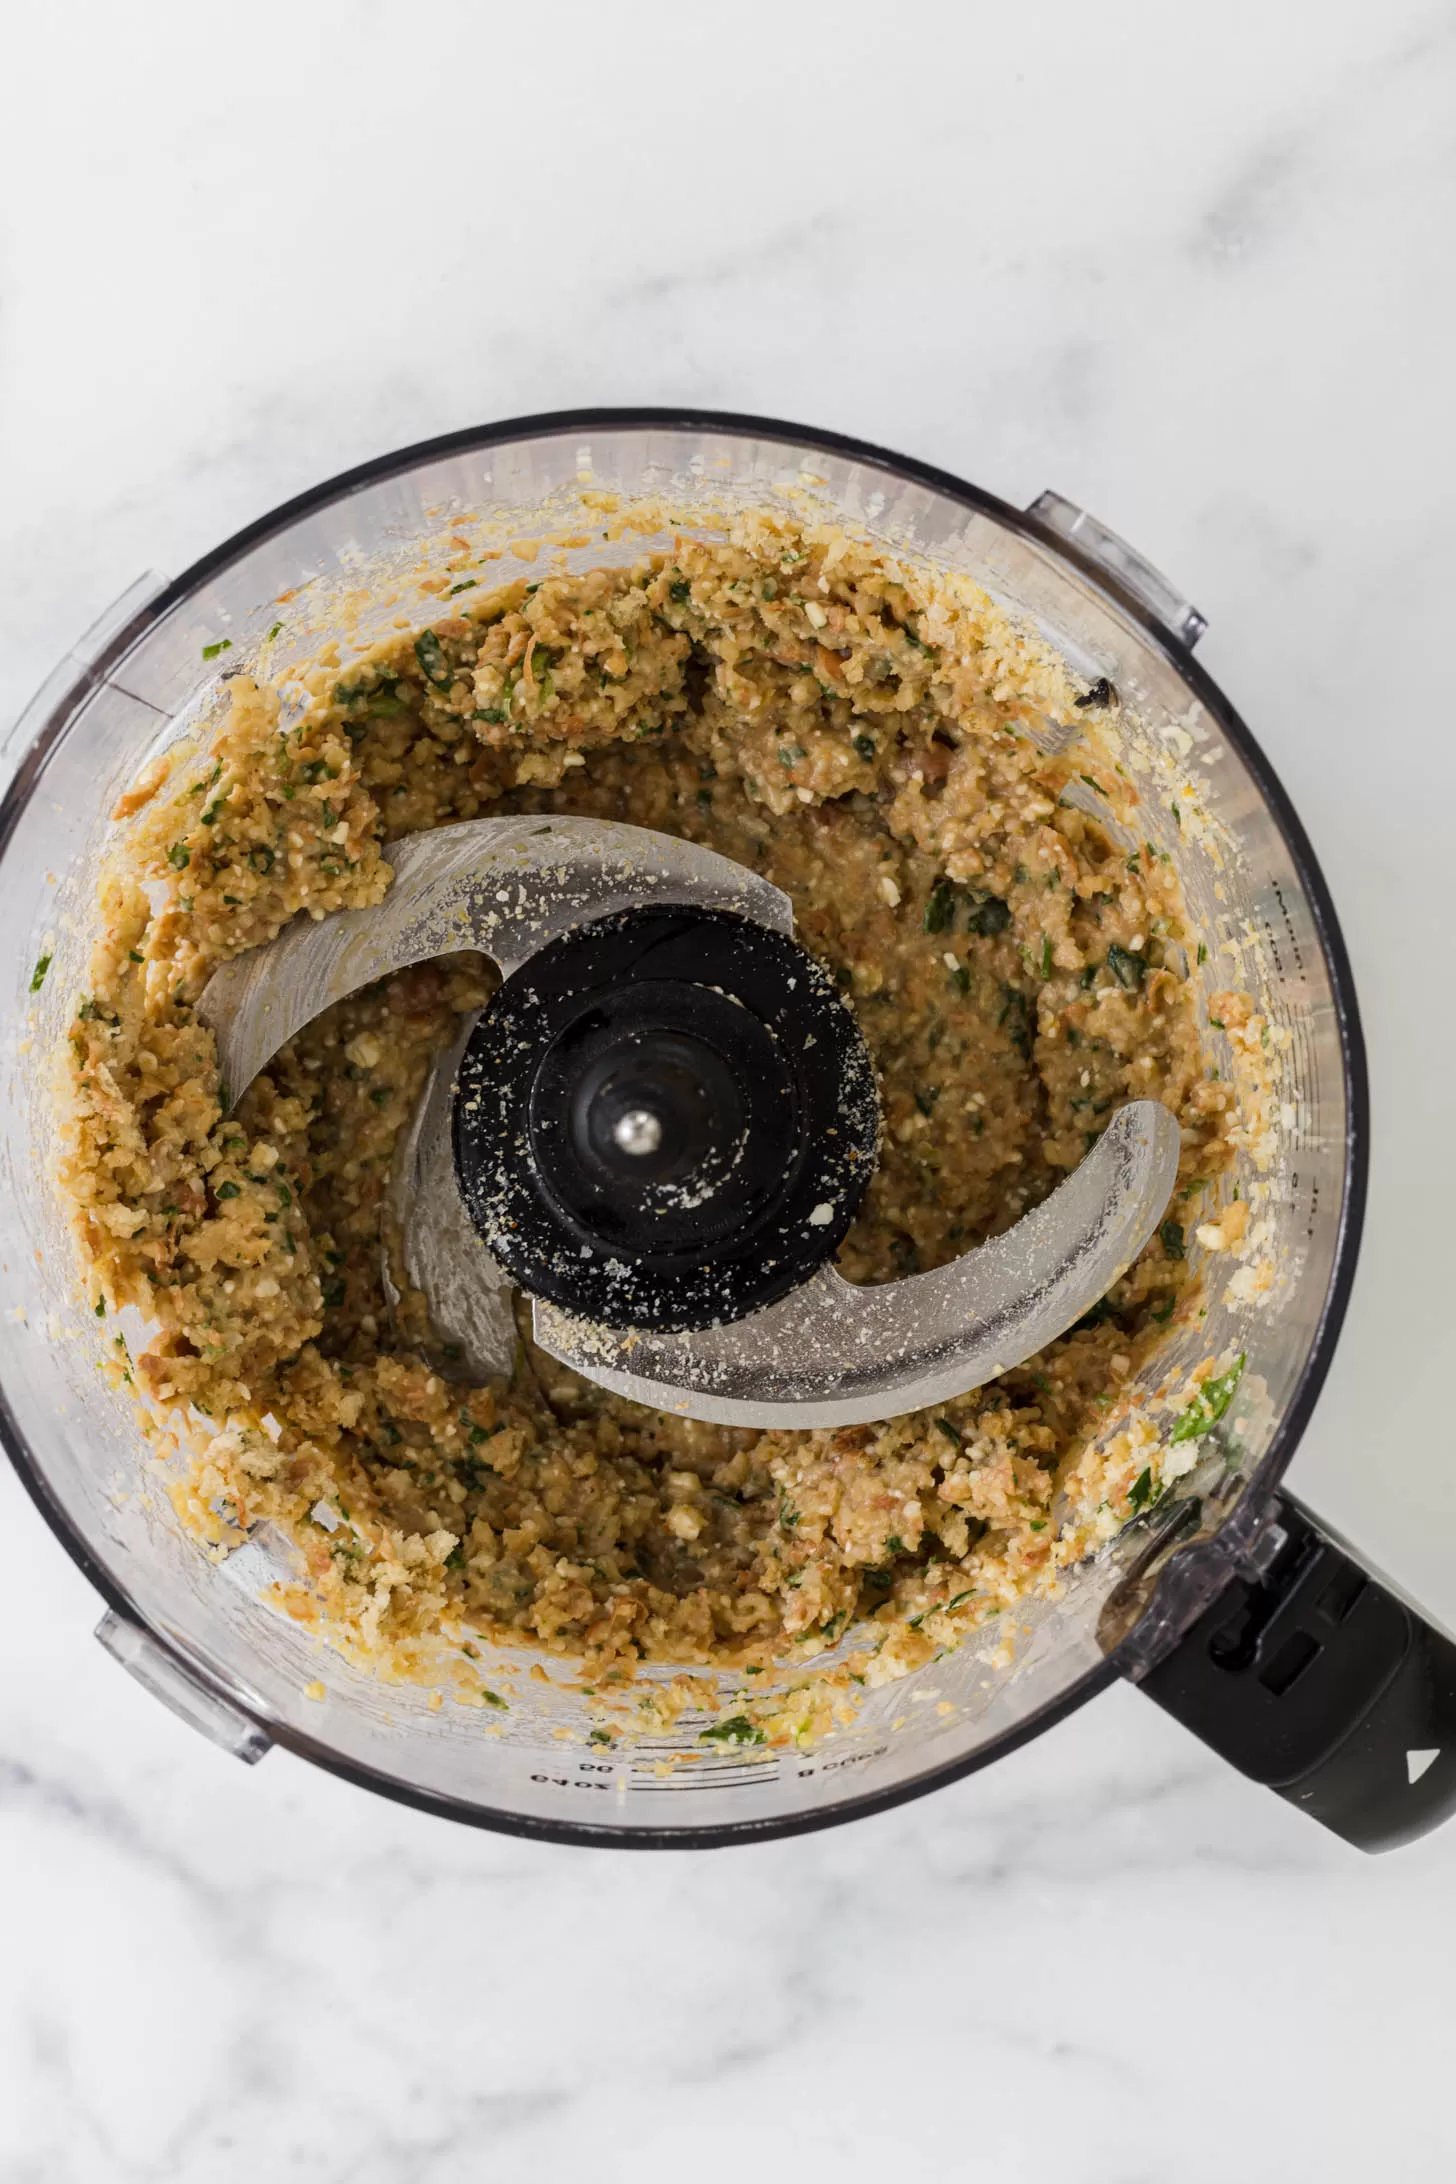 Blended ingredients in the food processor.